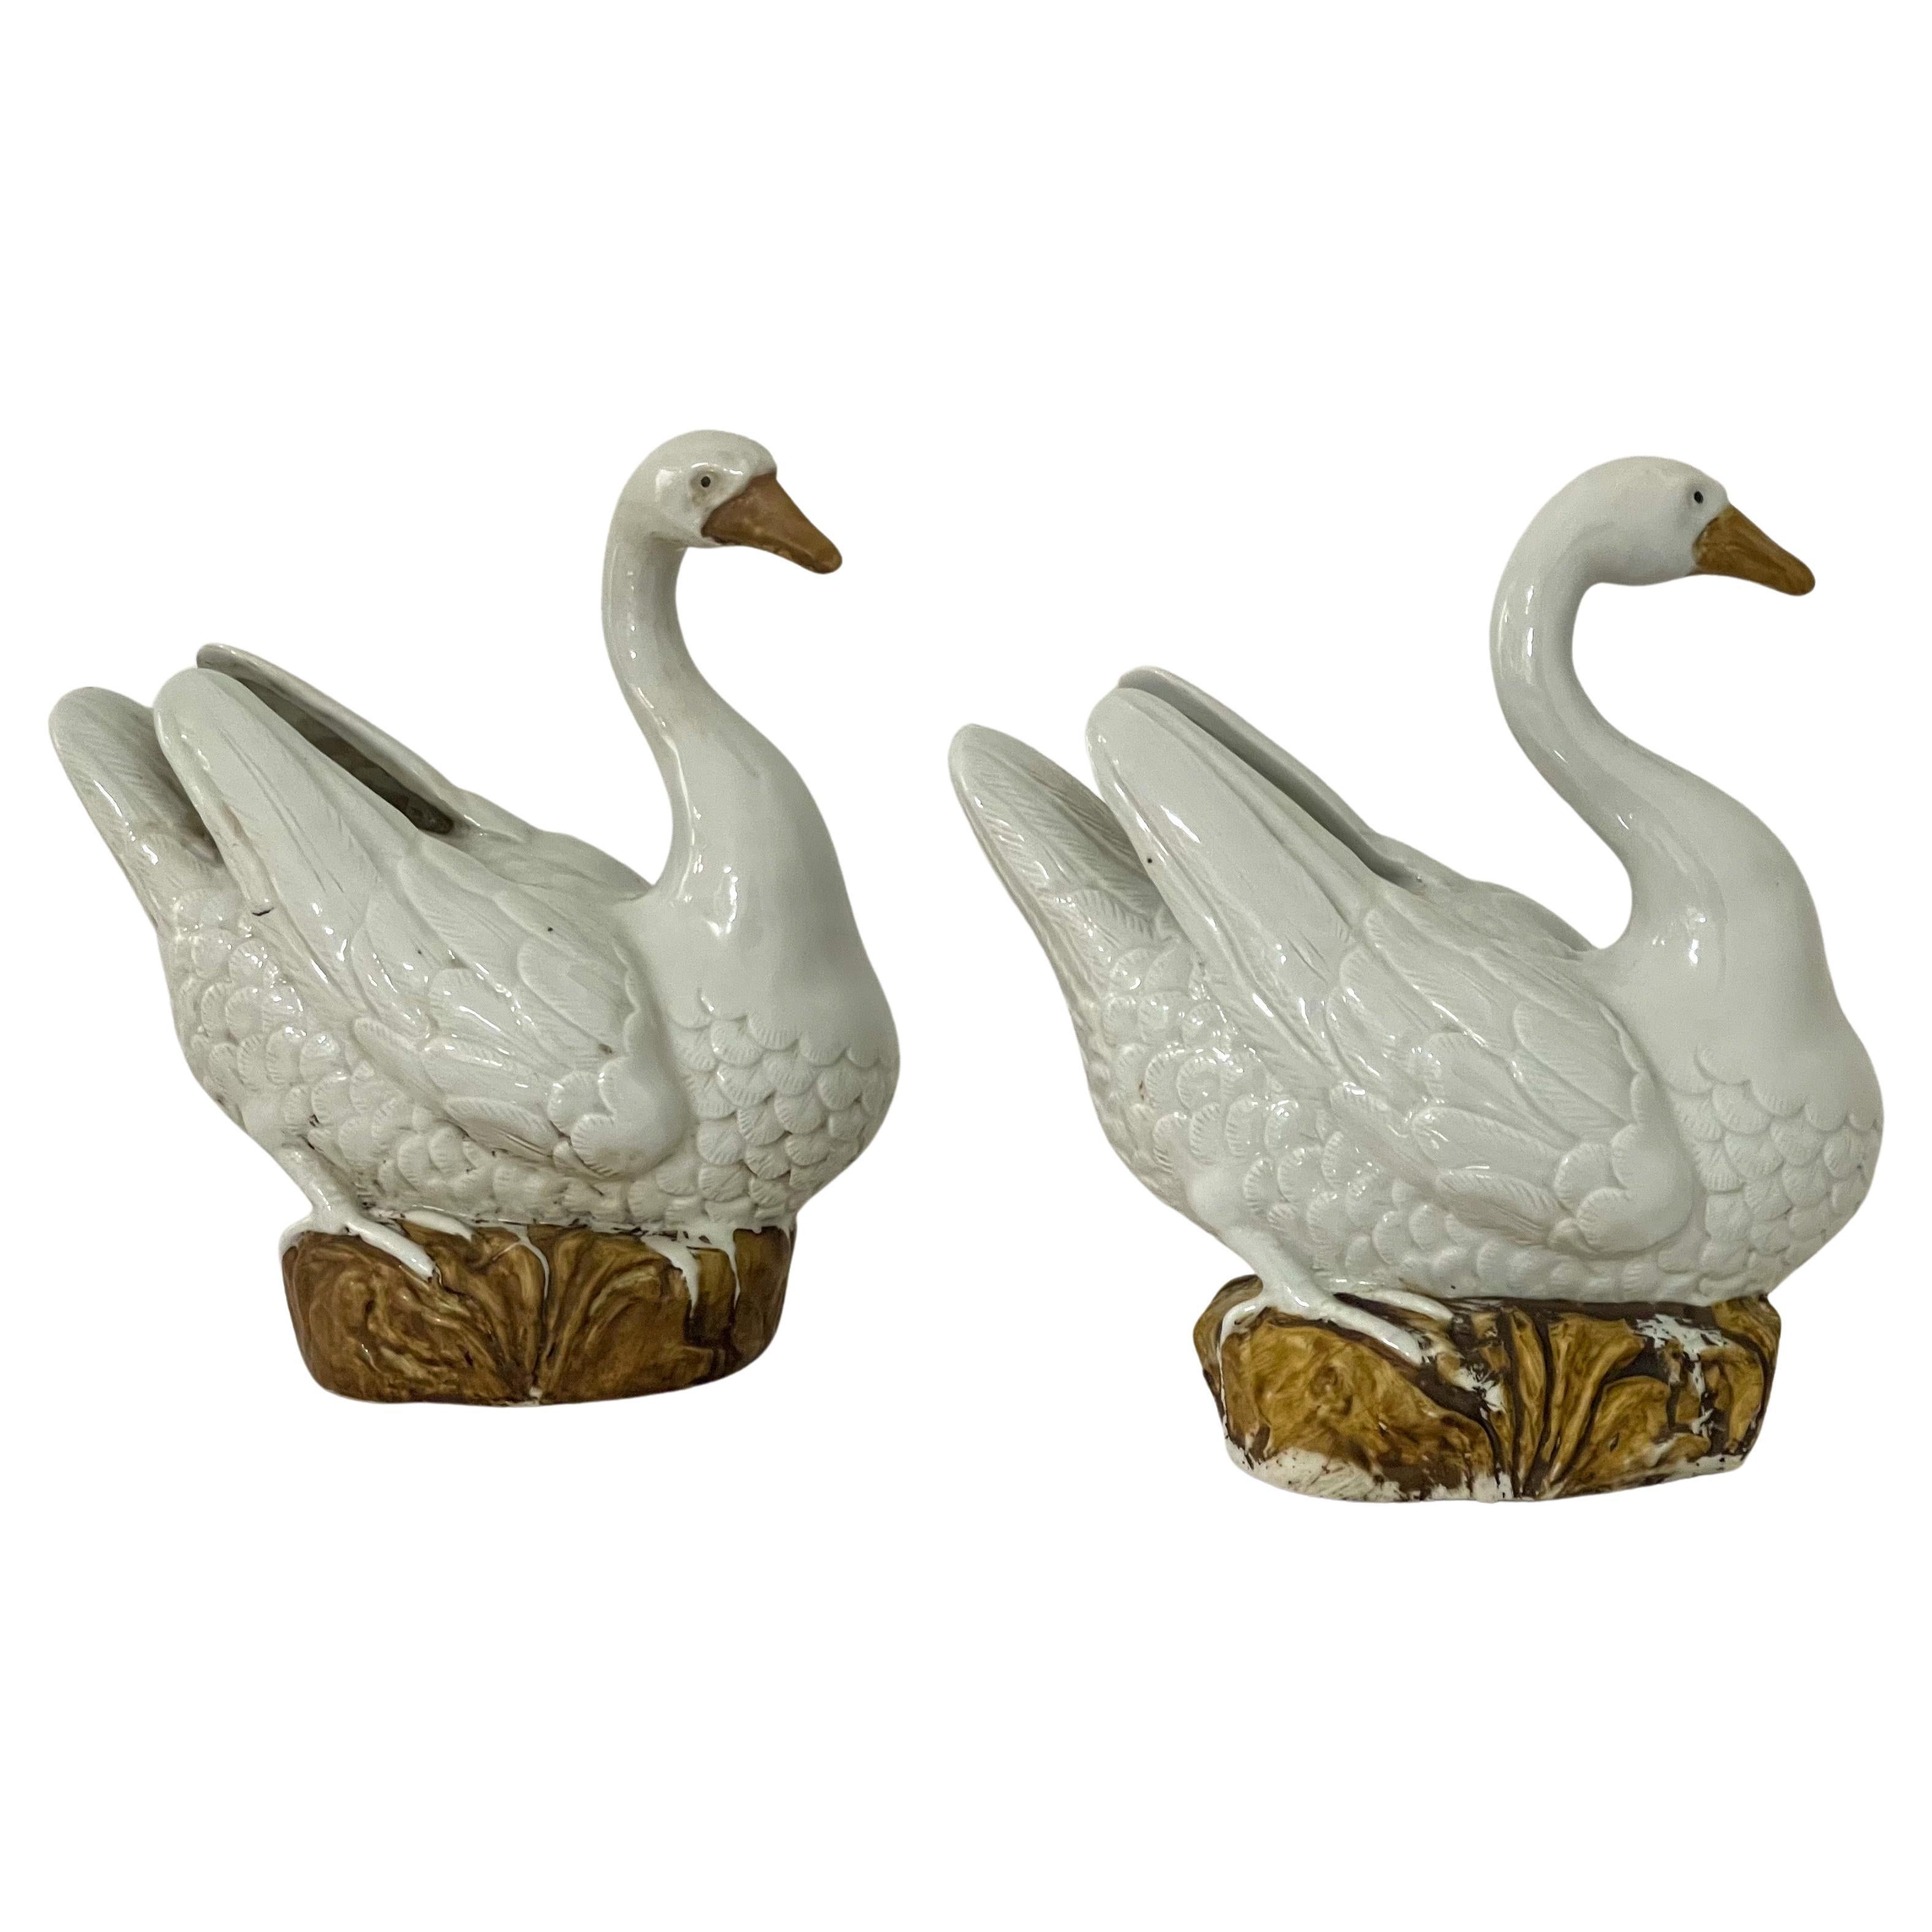 Great for gifting to yourself or someone else! This is a pair of mid-century Chinese Export style swan figurines. They are unmarked and in very good condition. 